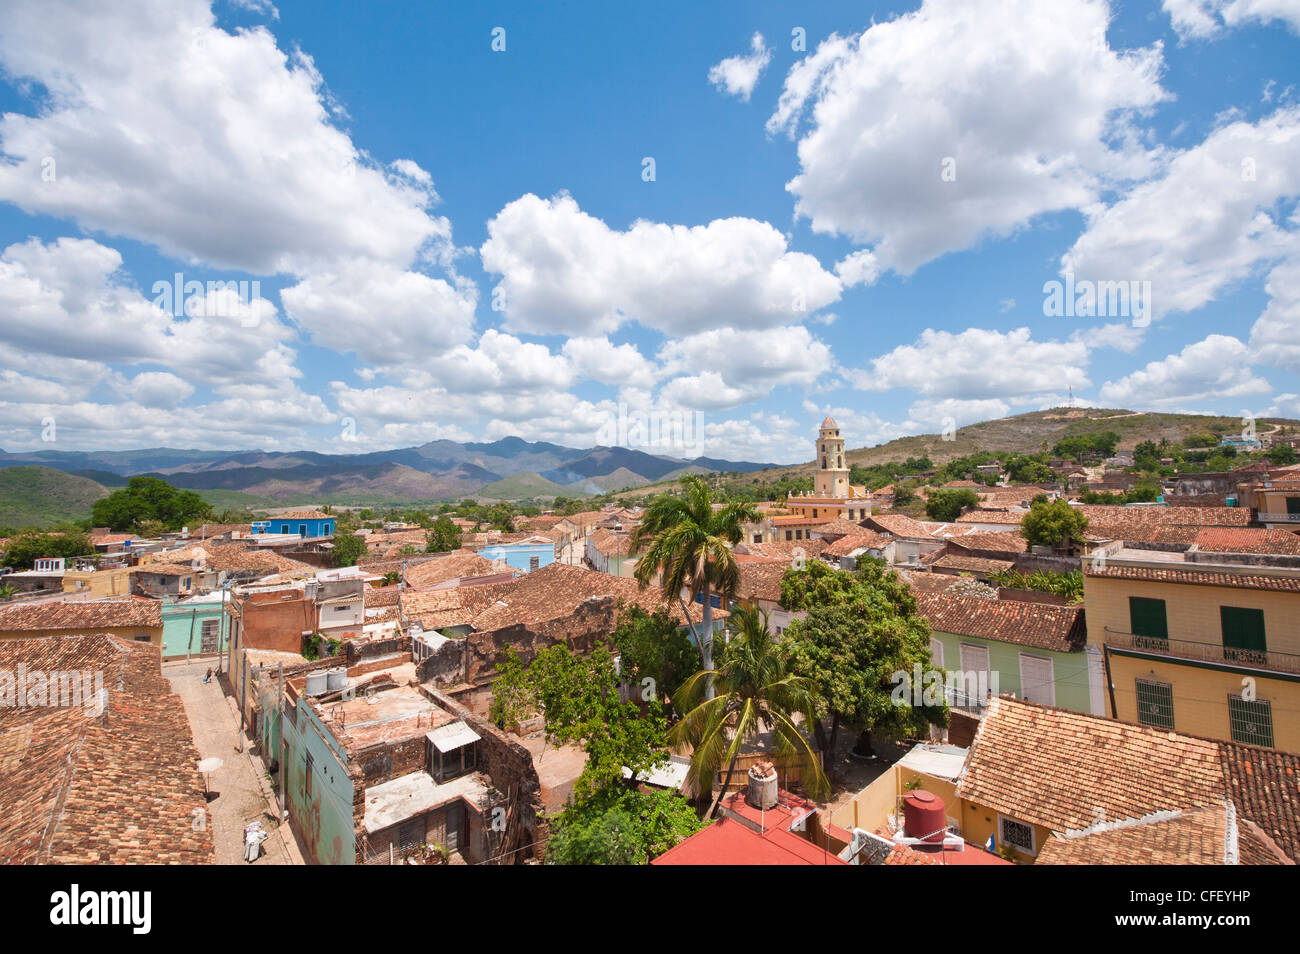 View of Trinidad, UNESCO World Heritage Site, from Palacio Brunet tower, Trinidad, Cuba, West Indies, Caribbean, Central America Stock Photo